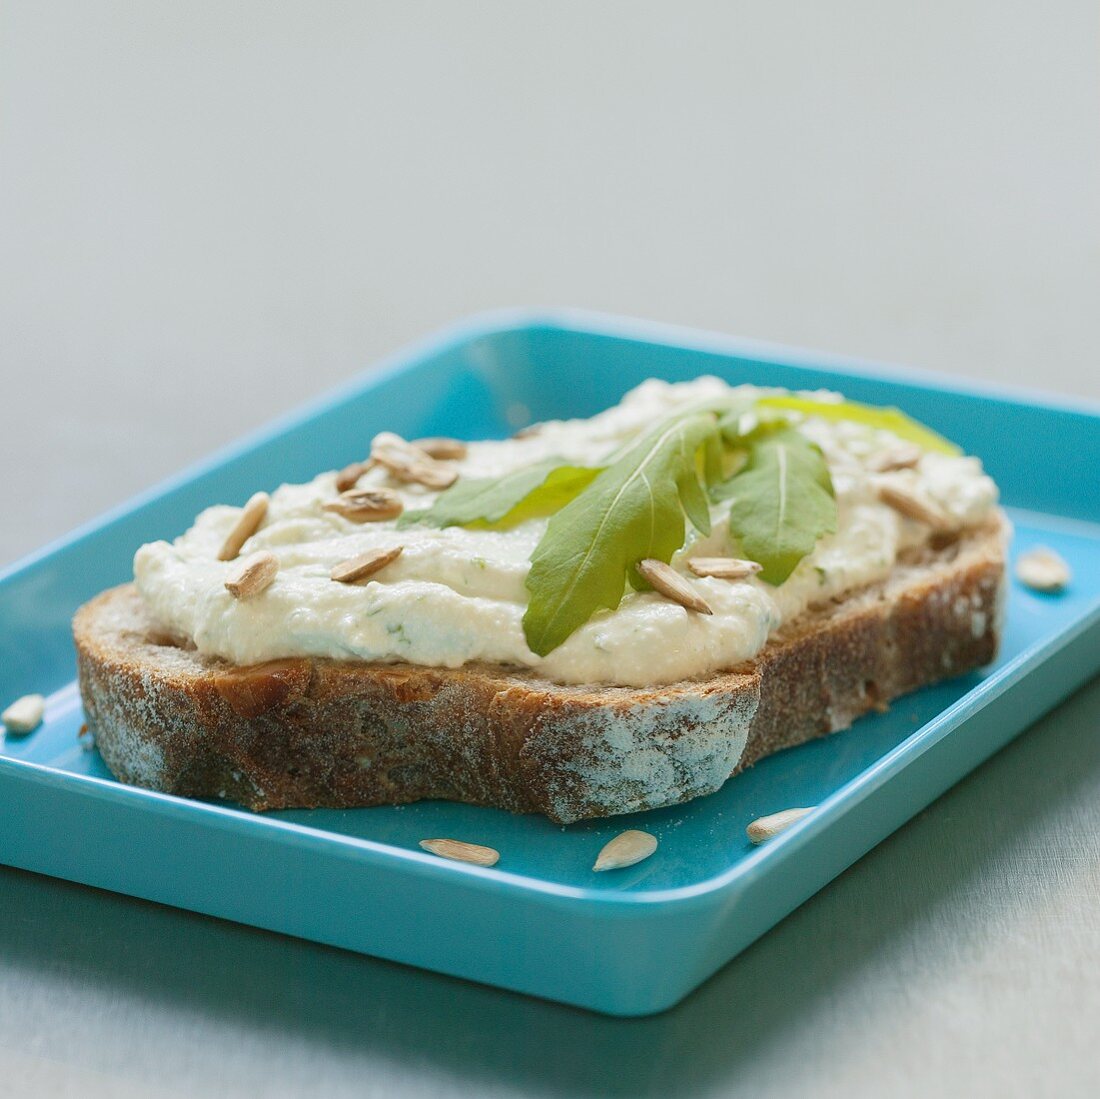 Cheese spread, sunflower seeds and rocket on bread